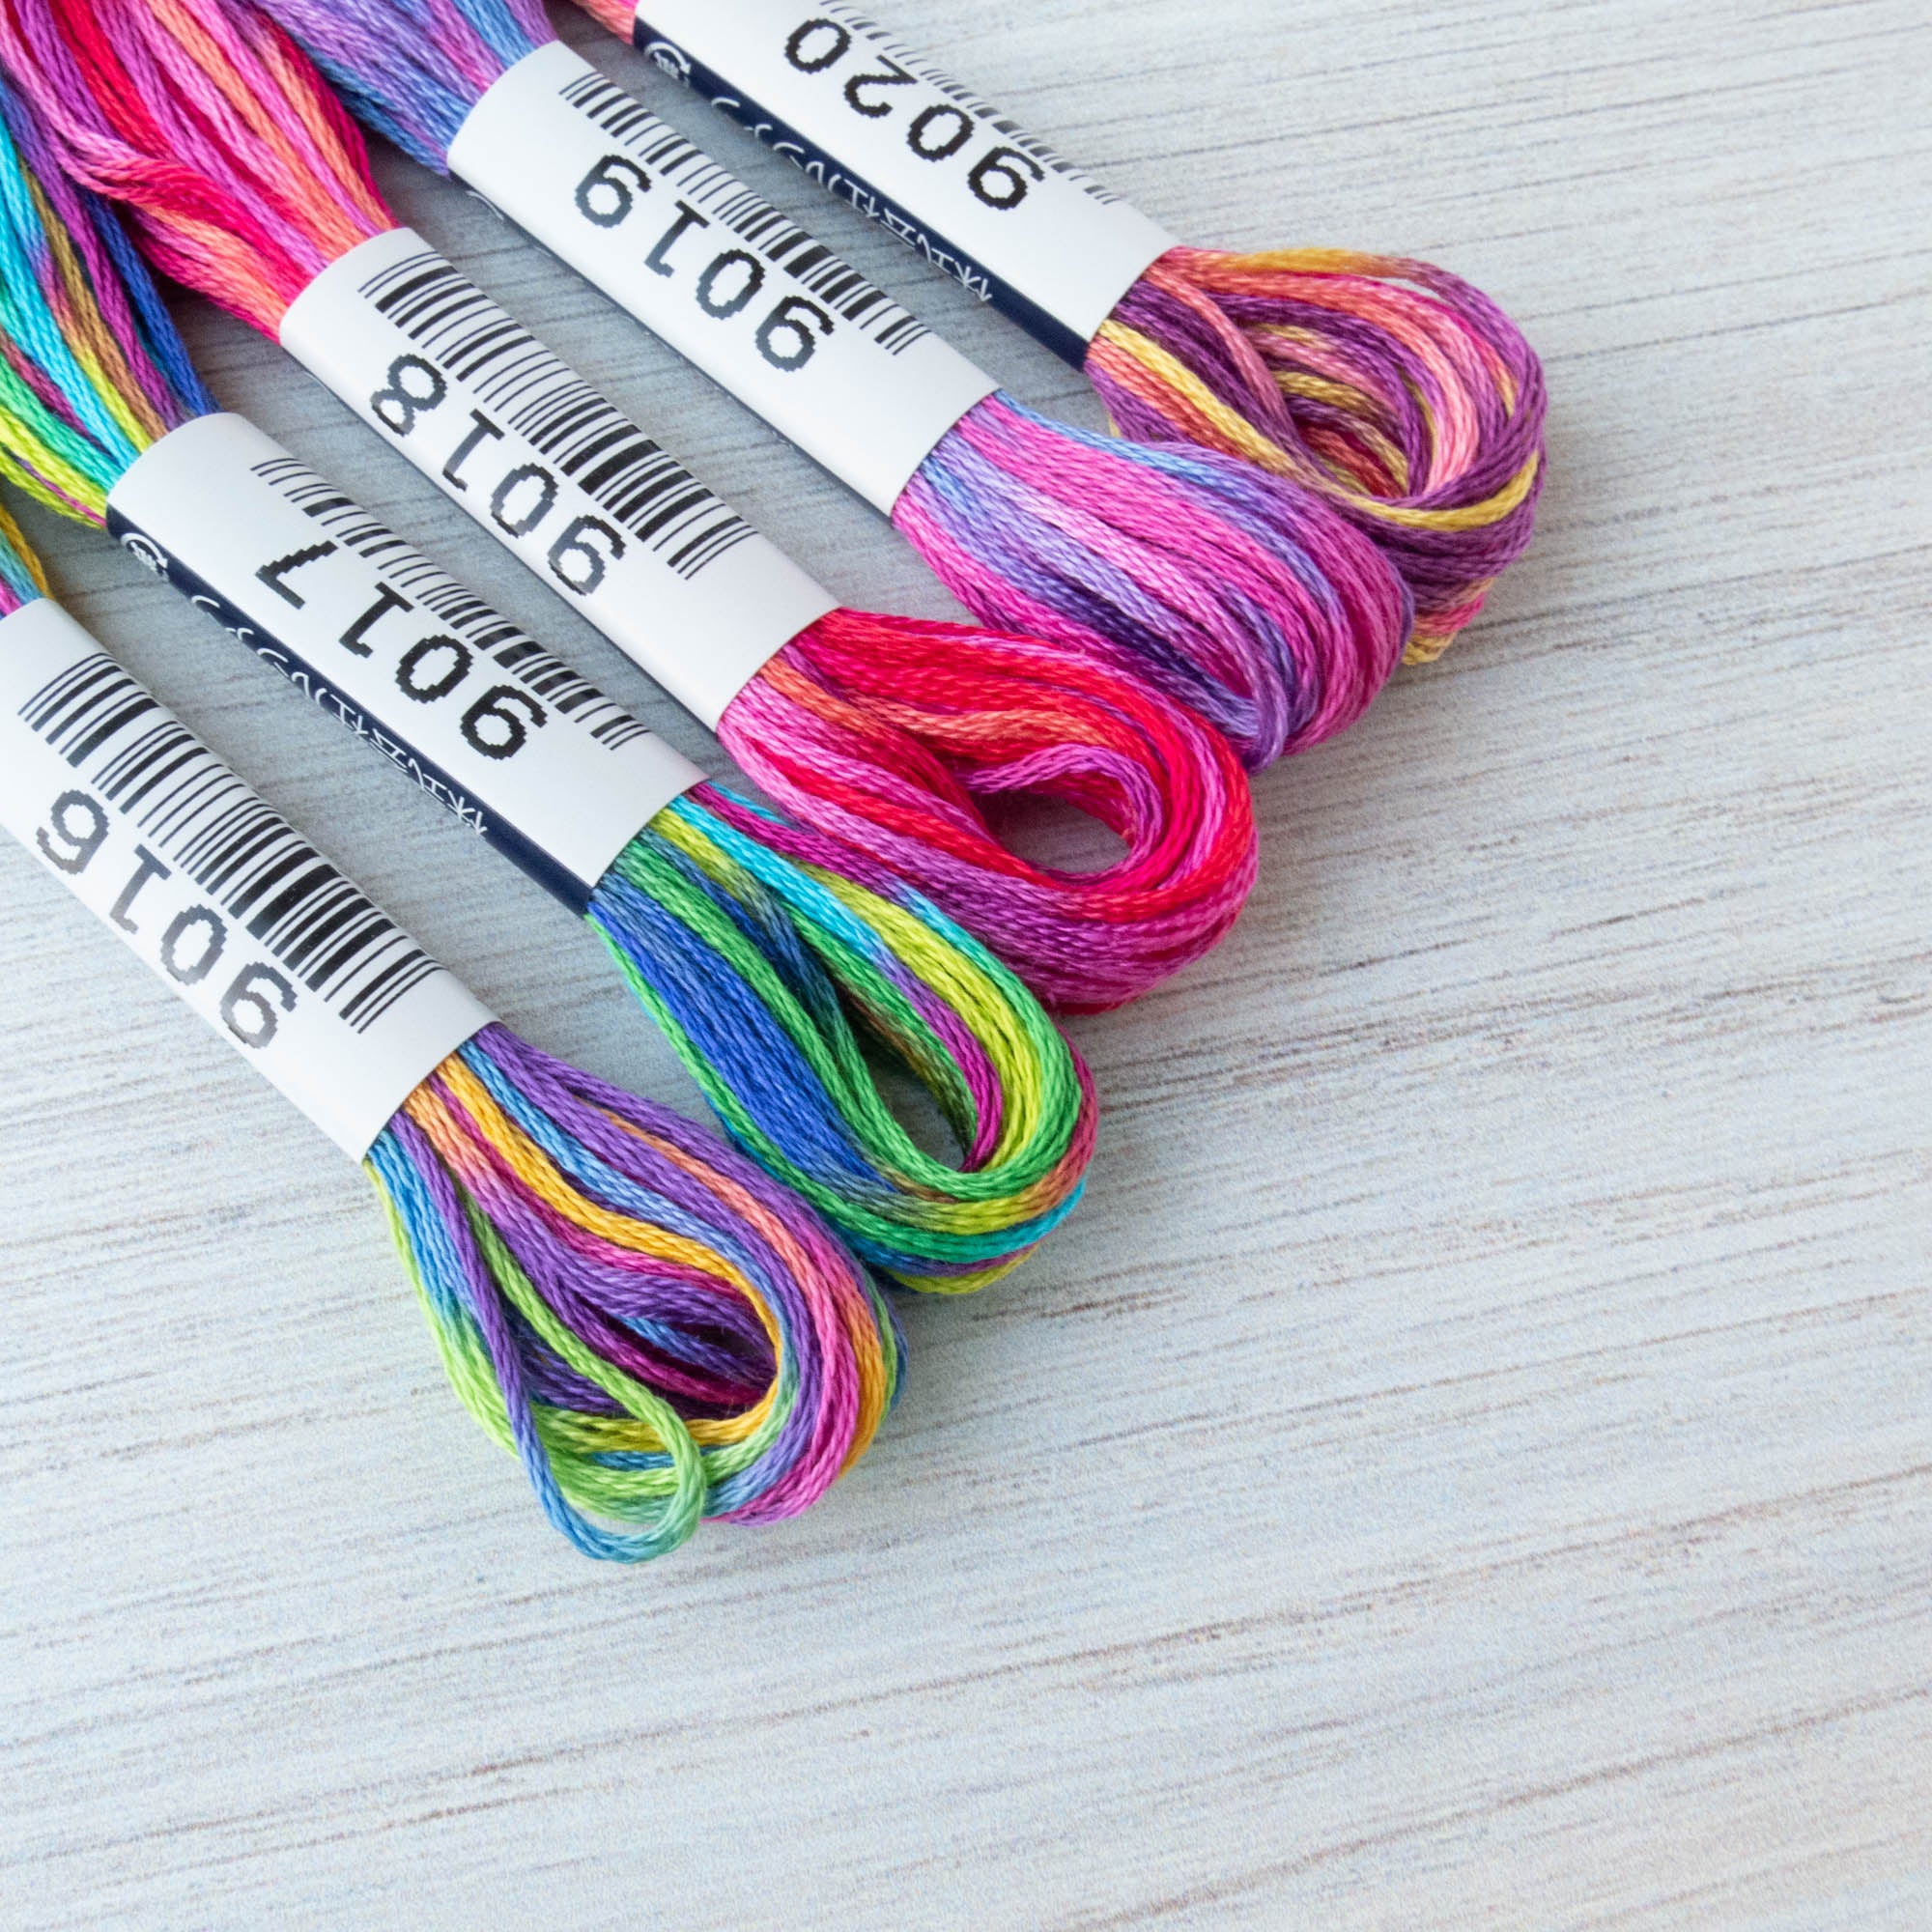 COSMO Embroidery Floss Pack from Lecien, Japan, for the Pattern of Blo –  SoKe